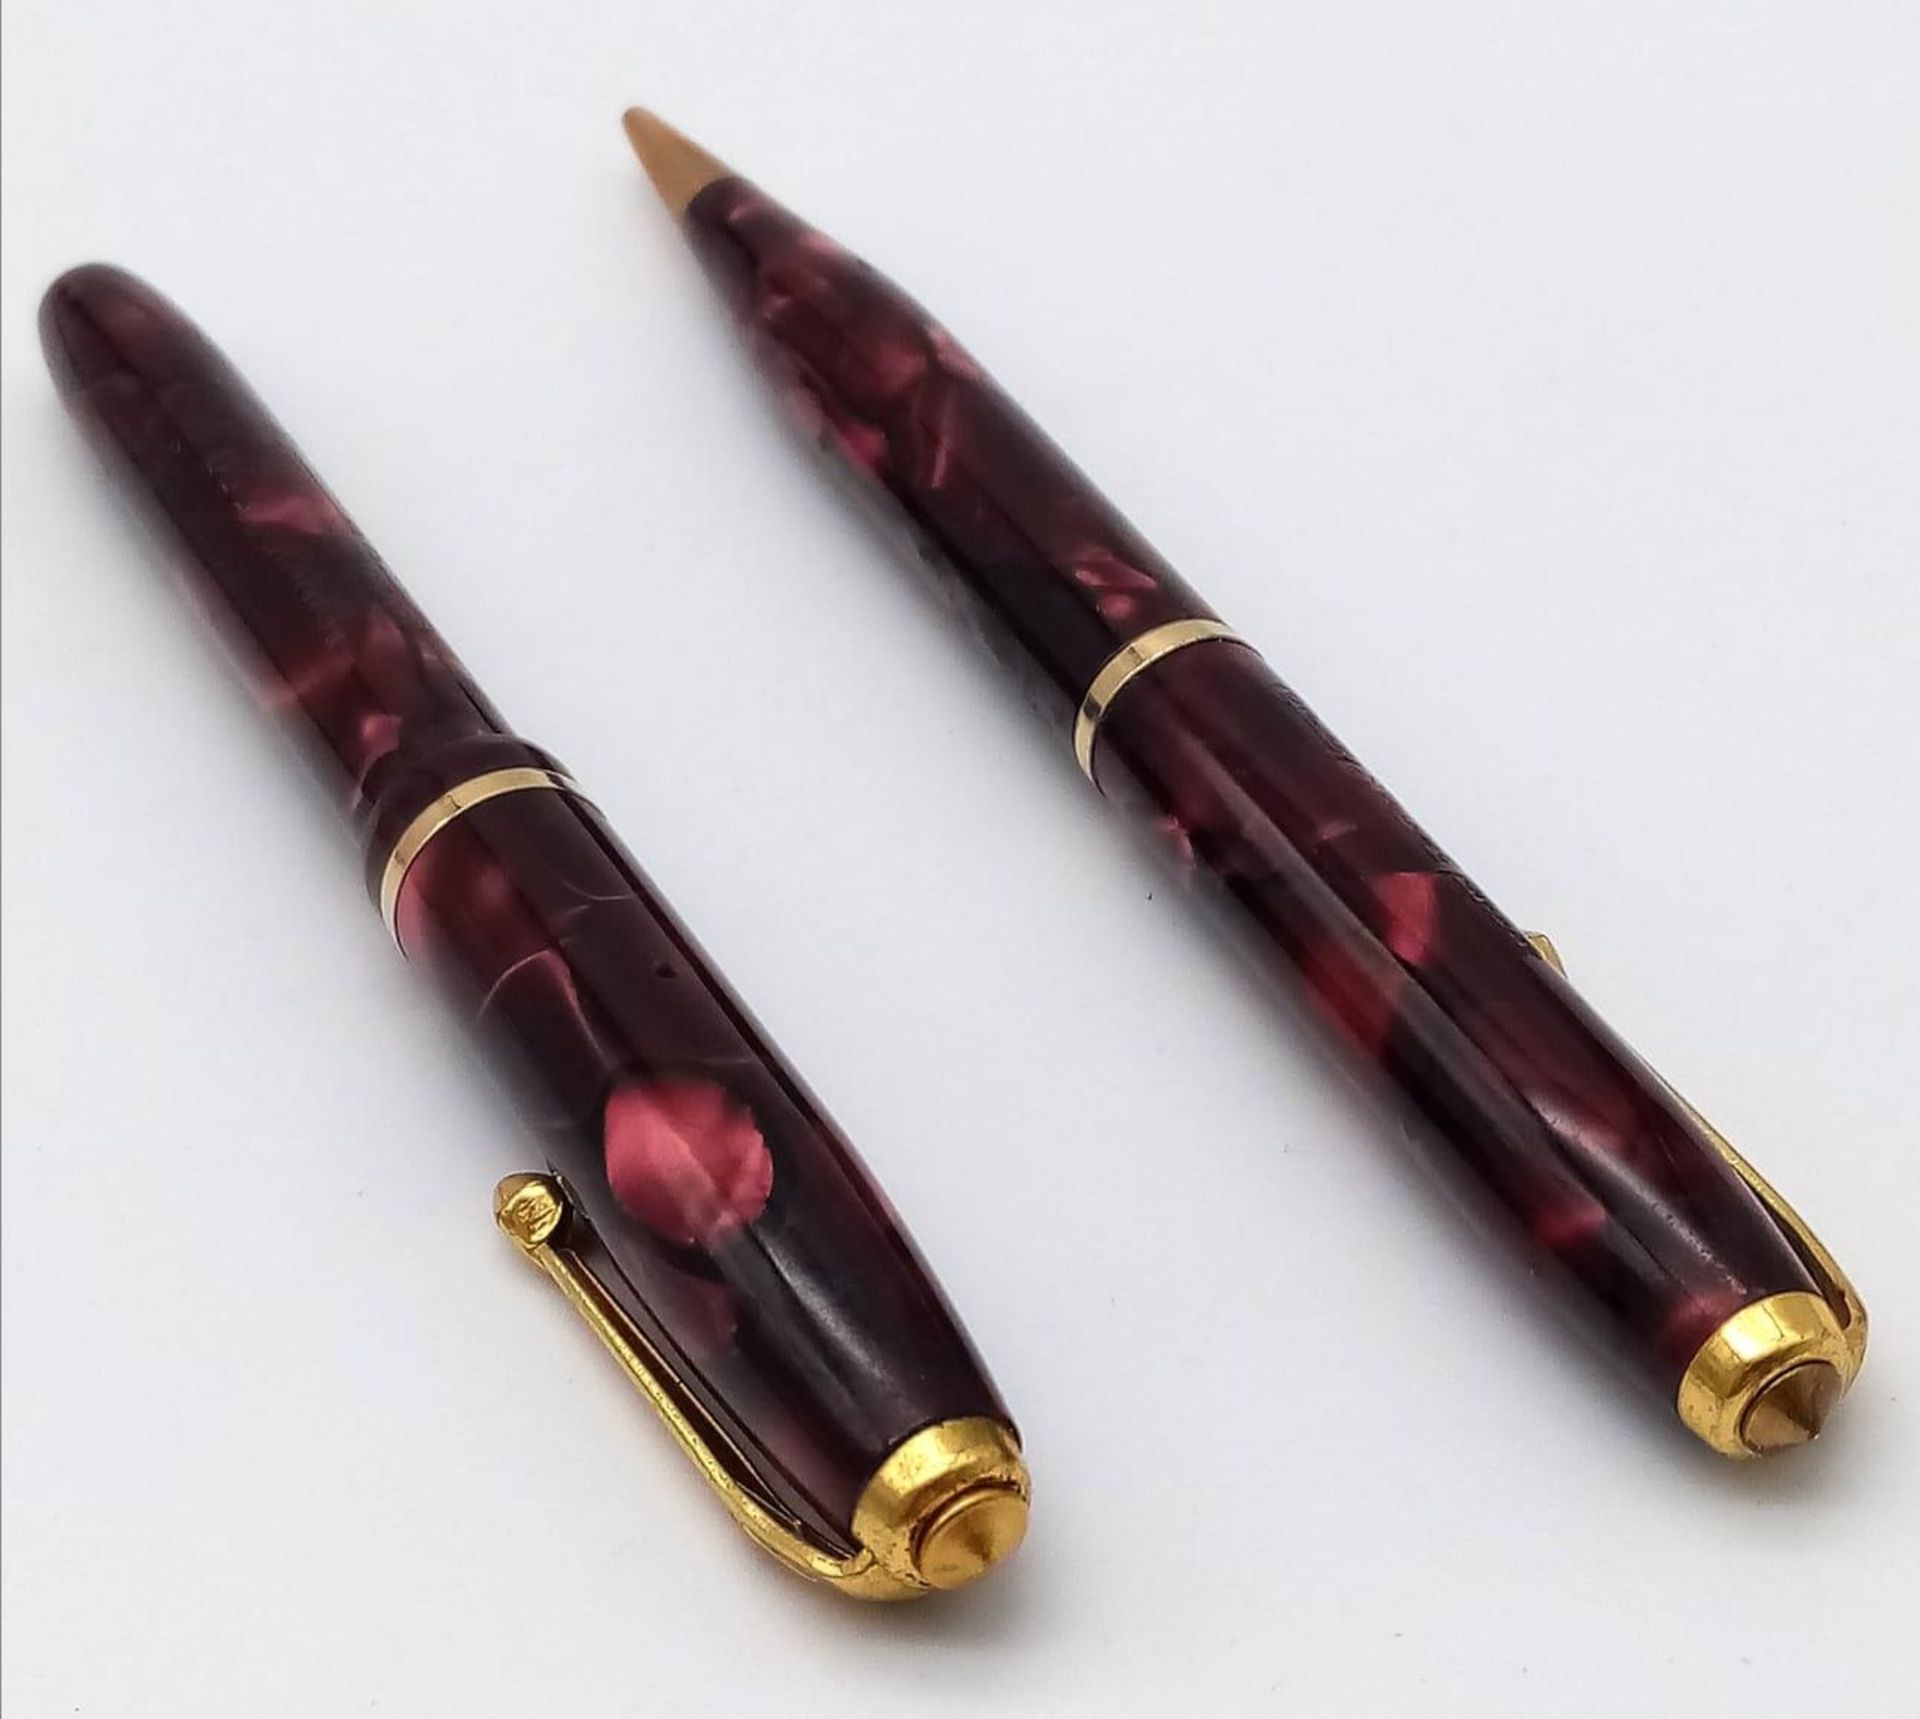 Two Conway Stewart Small Pens in Original Case. Fountain pen has a 14k gold nib. 10cm and 11cm. Ref: - Image 4 of 10